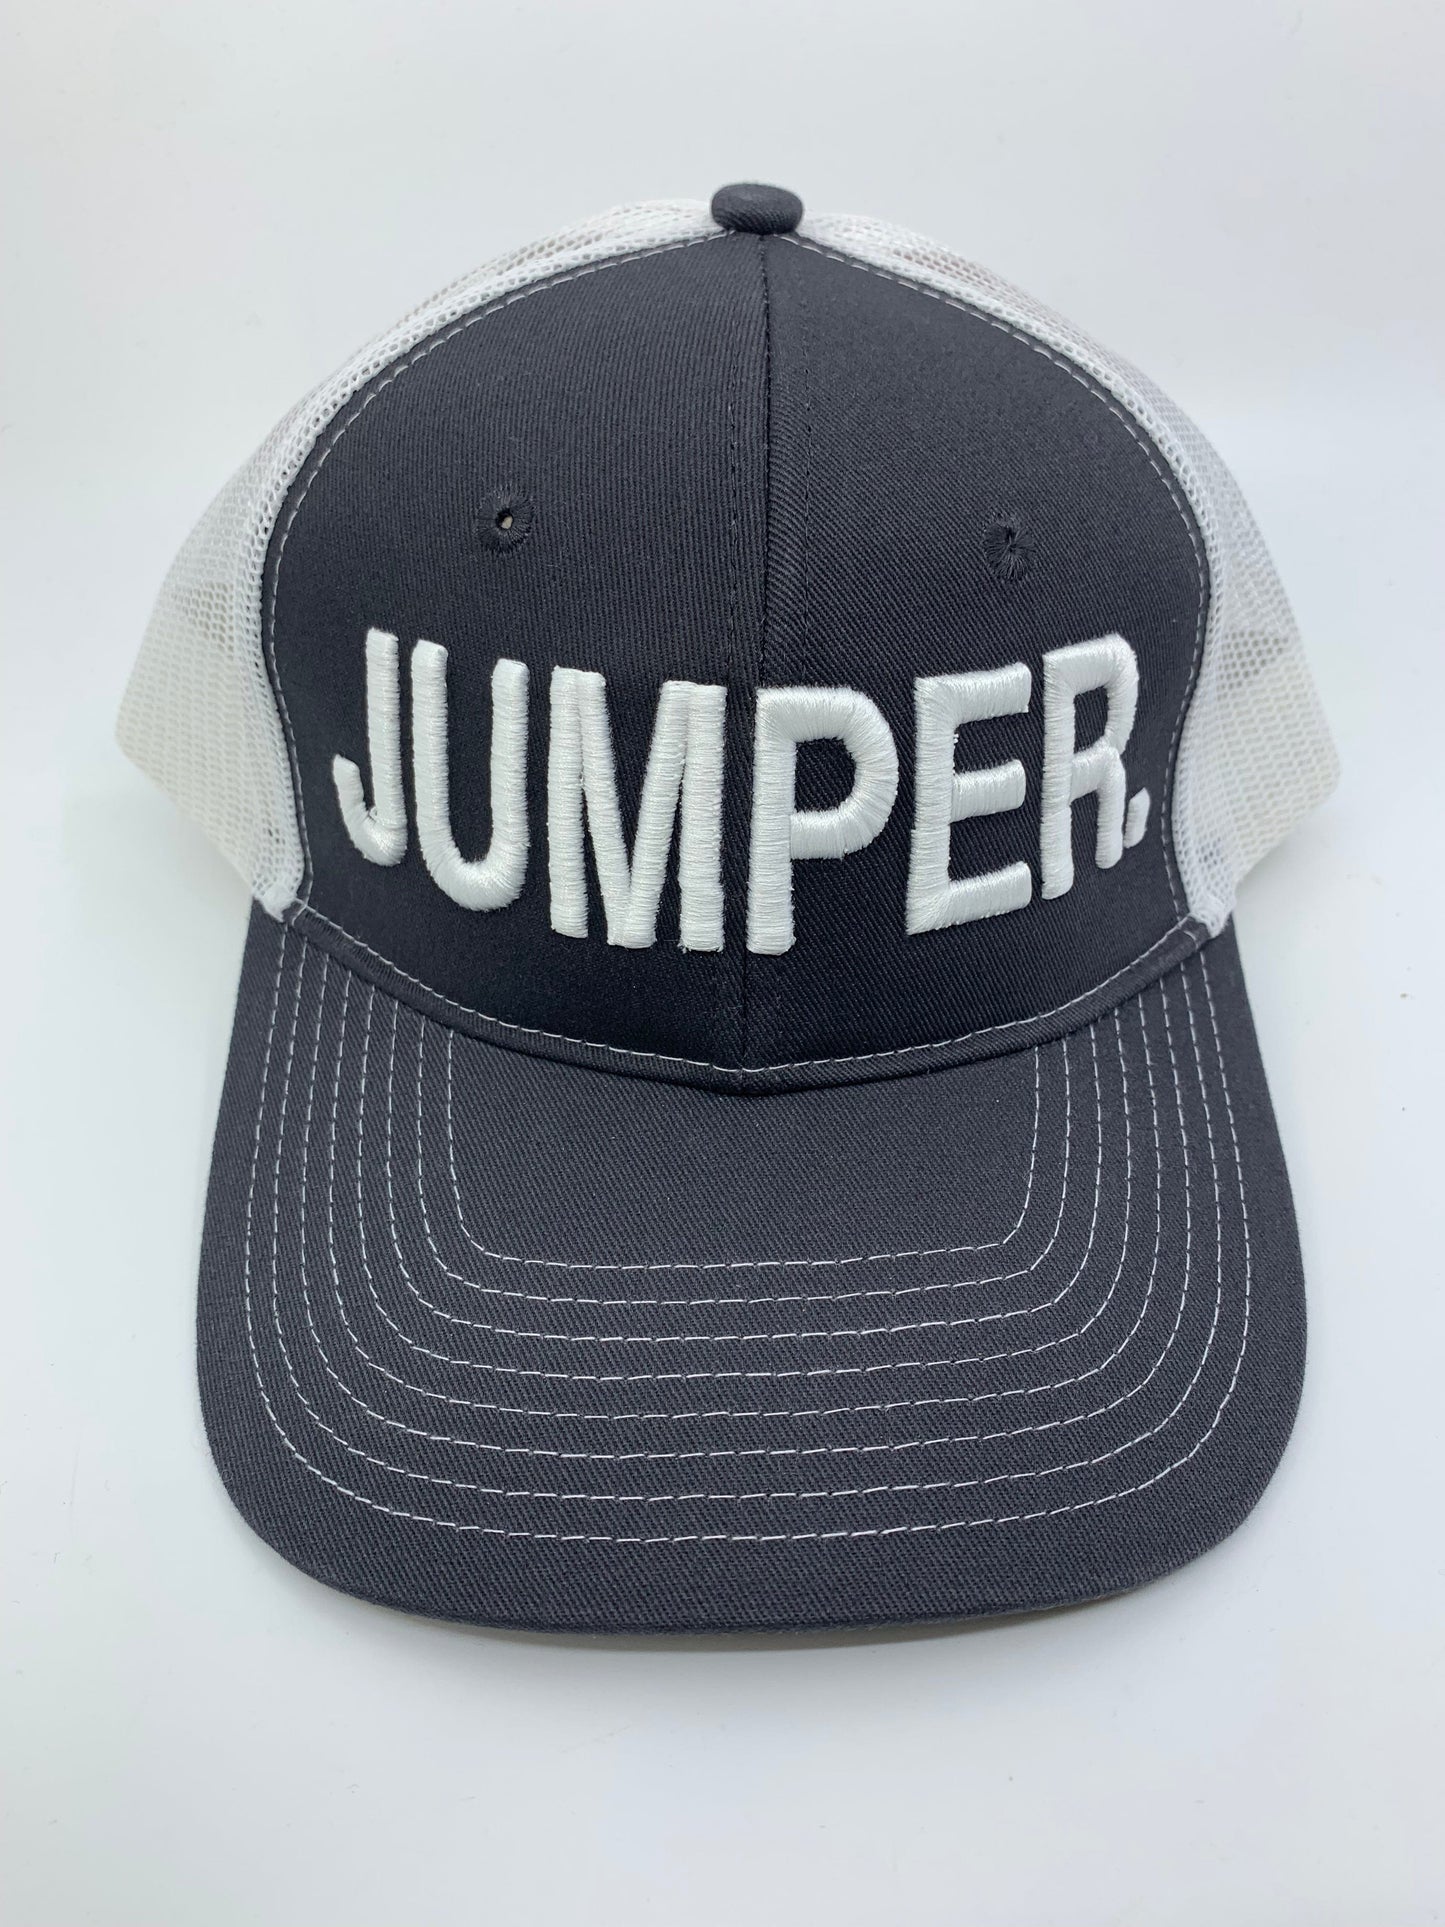 Equestrian Team Apparel Custom Team Hats Trucker Cap-JUMPER. equestrian team apparel online tack store mobile tack store custom farm apparel custom show stable clothing equestrian lifestyle horse show clothing riding clothes horses equestrian tack store